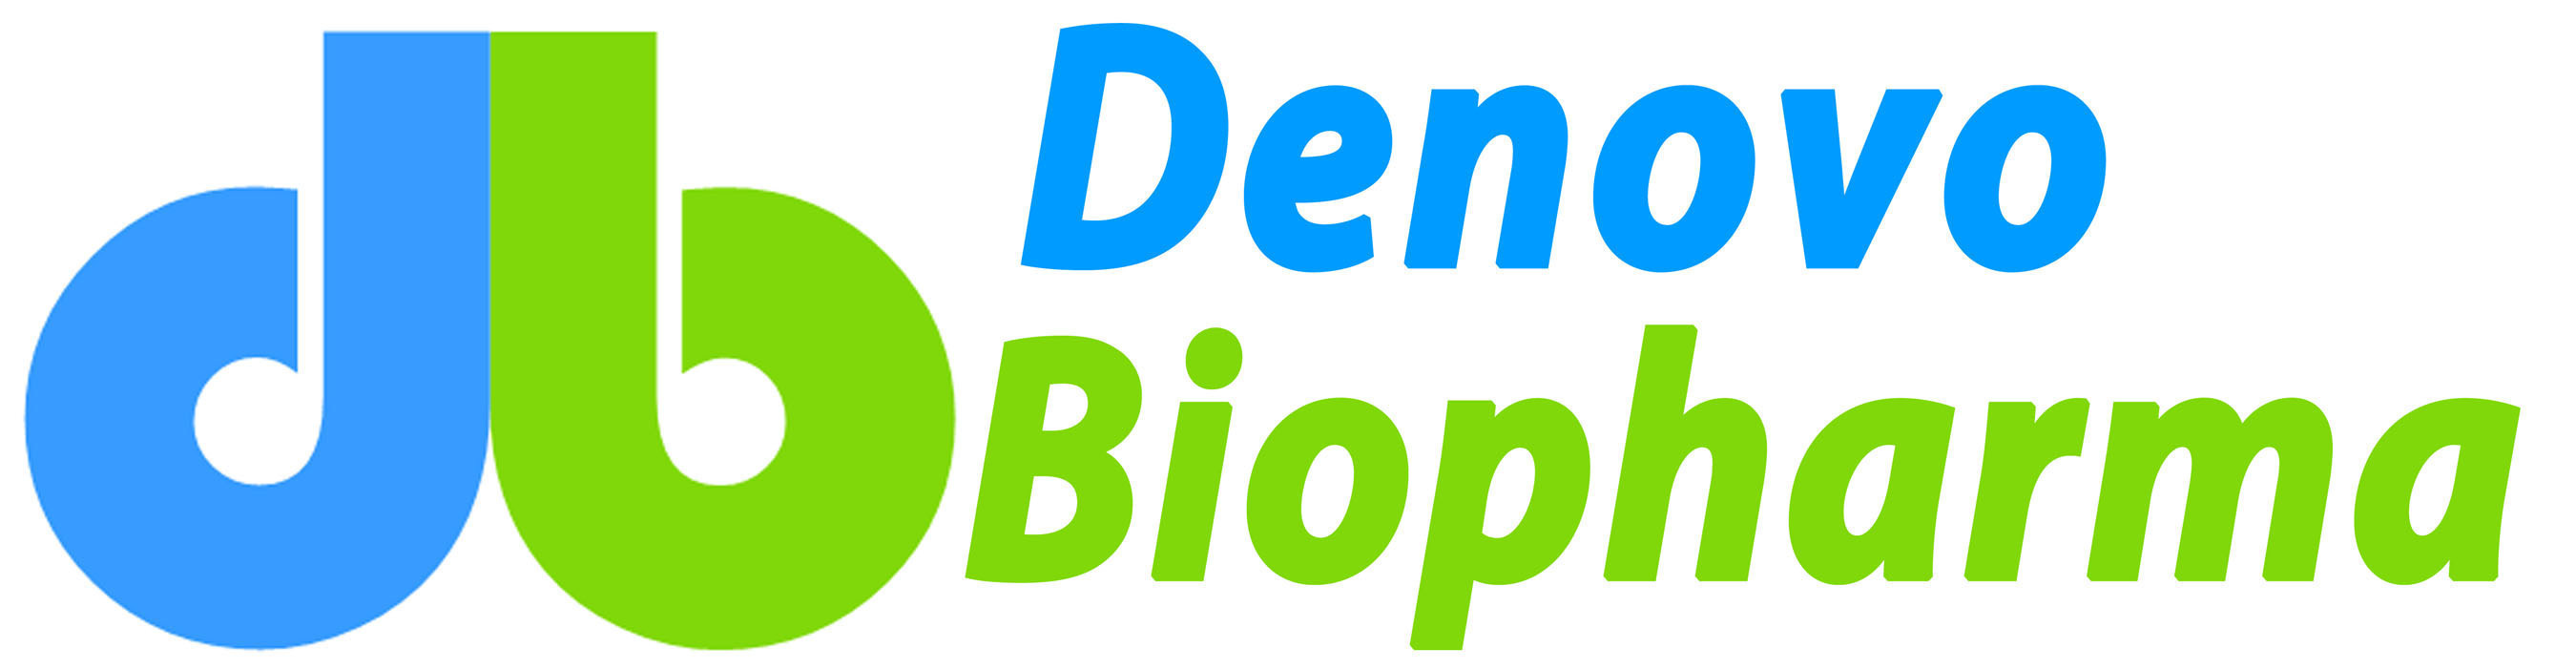 Denovo Biopharma provides novel, proprietary biomarker approaches to personalized drug development, including re-evaluating drugs that failed in general patient populations. The company has the first platform for de novo genomic biomarker discovery using archived clinical samples. By retrospectively identifying biomarkers correlated with responses to drugs, Denovo enables clinical trials in targeted patient populations while optimizing efficacy, safety and tolerability. www.denovobiopharma.com.